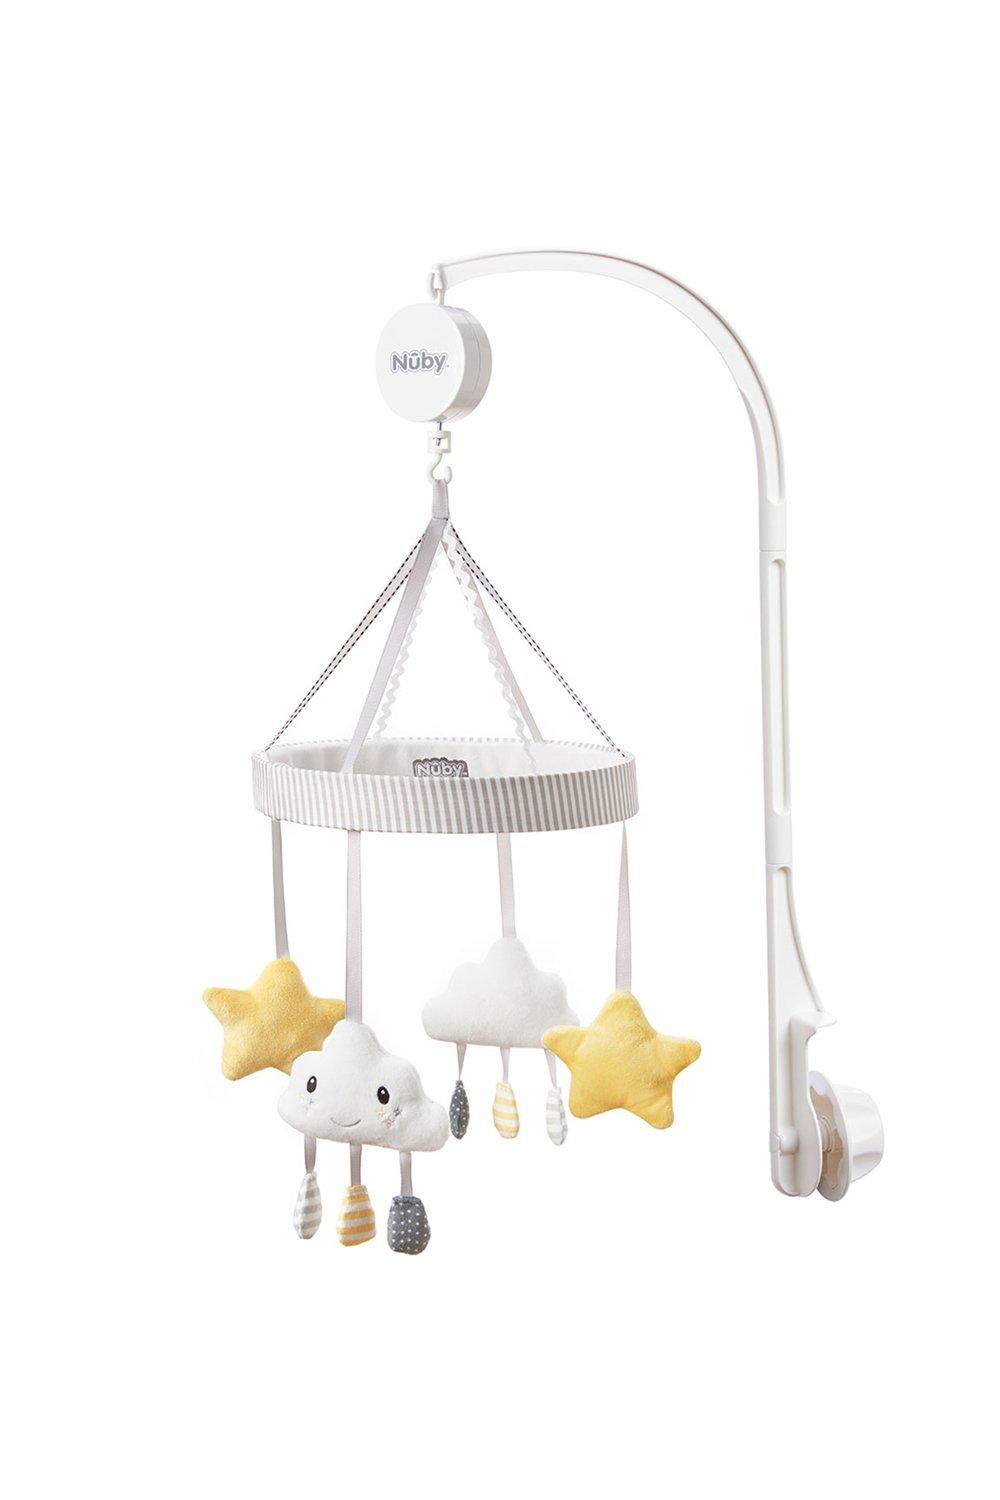 Nuby Cloud and Star Cot Mobile